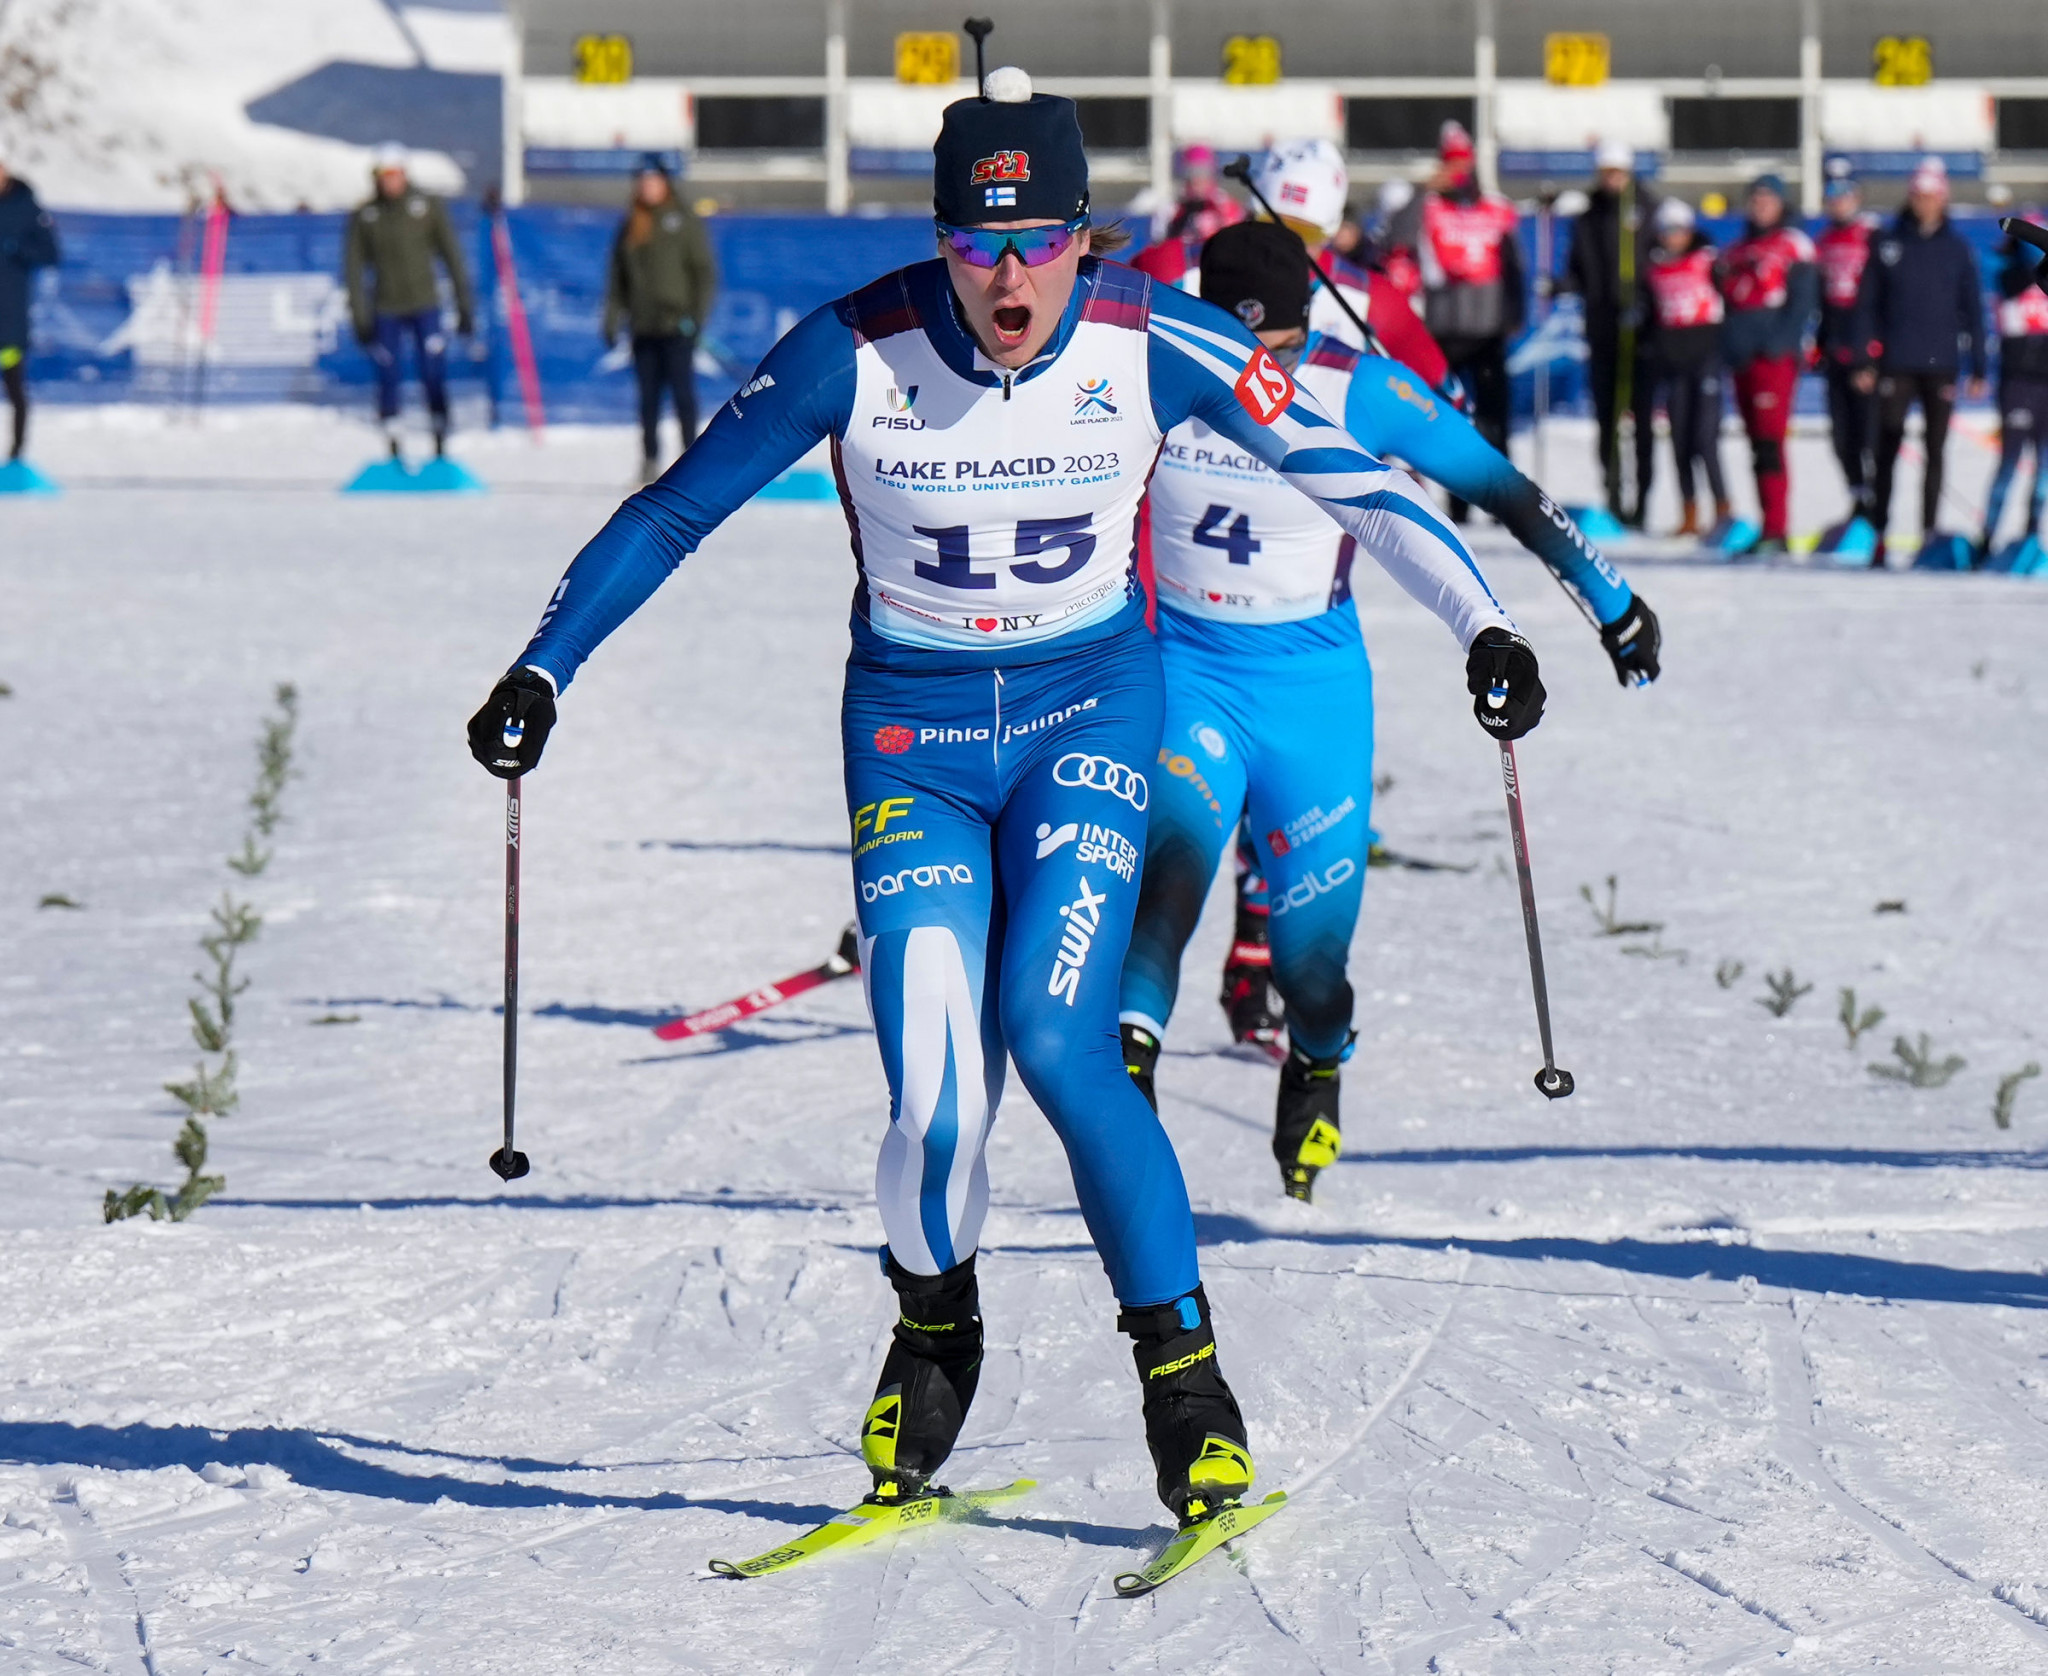 Verneri Poikonen of Finland snatched gold in the men's cross-country sprint with a time of 2:34.74 on the 1.5km course ©FISU